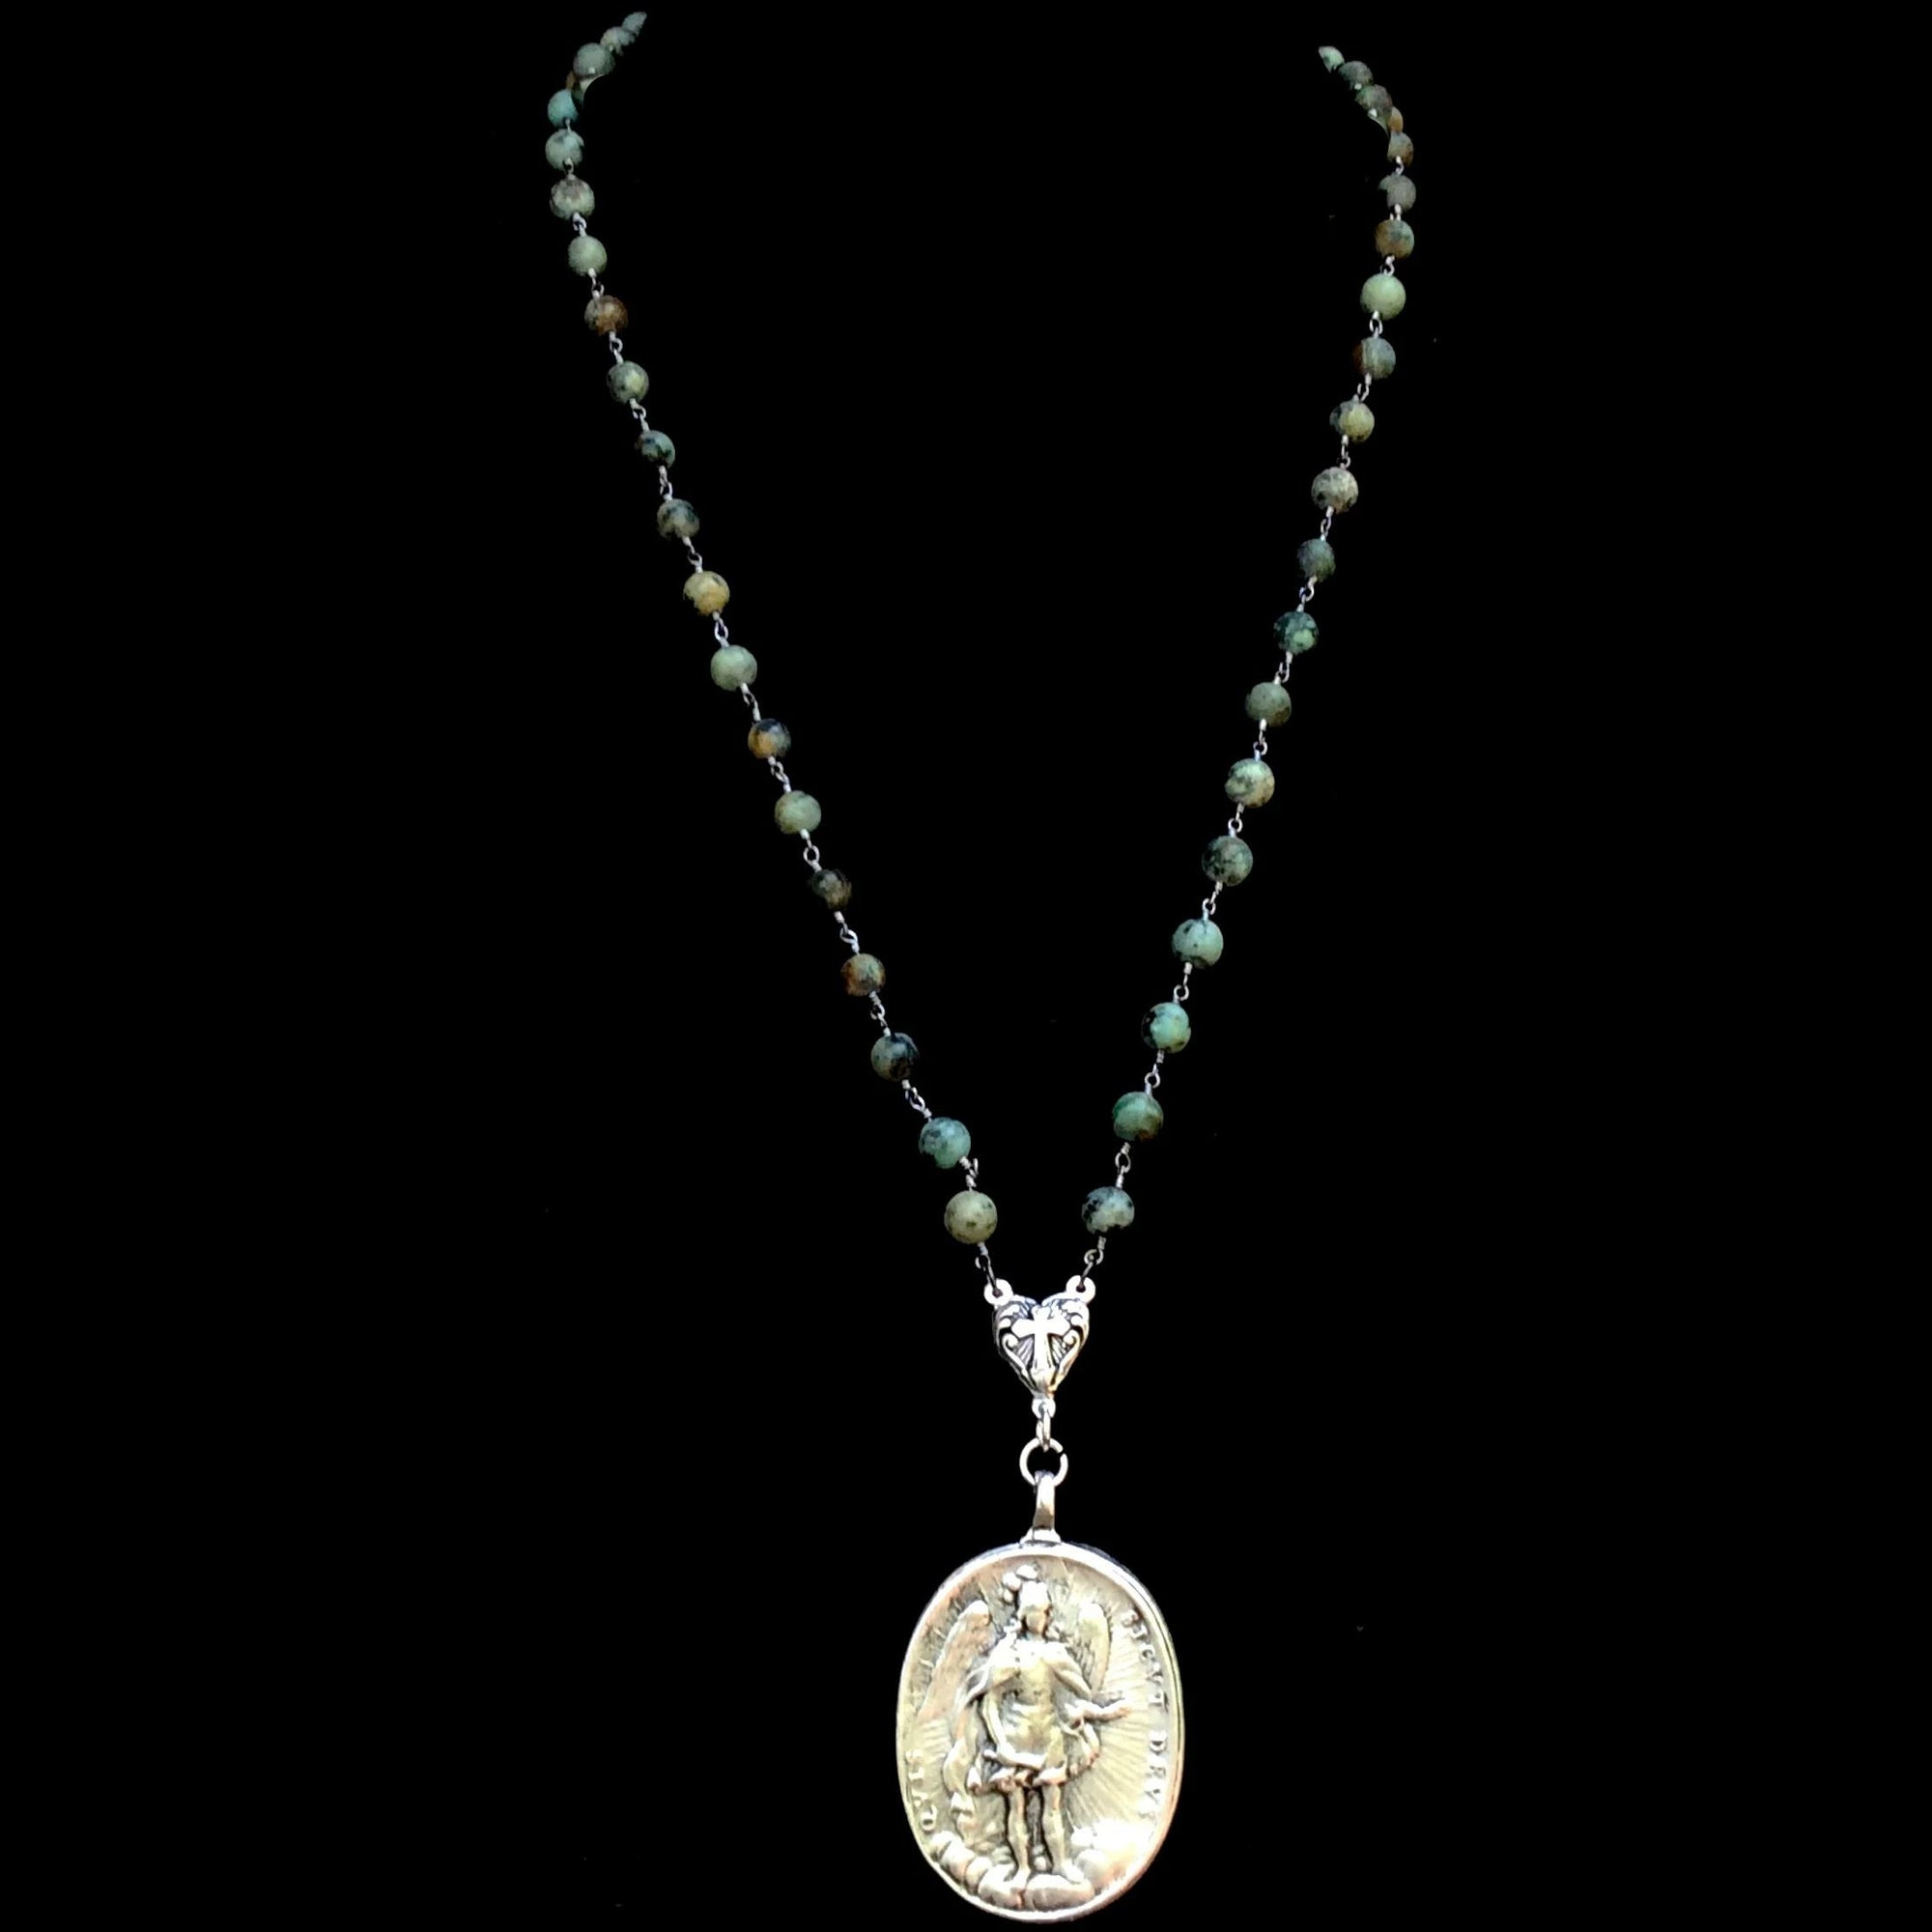 Cristo Rey Rosary Necklace with Saint Michael in African Turquoise